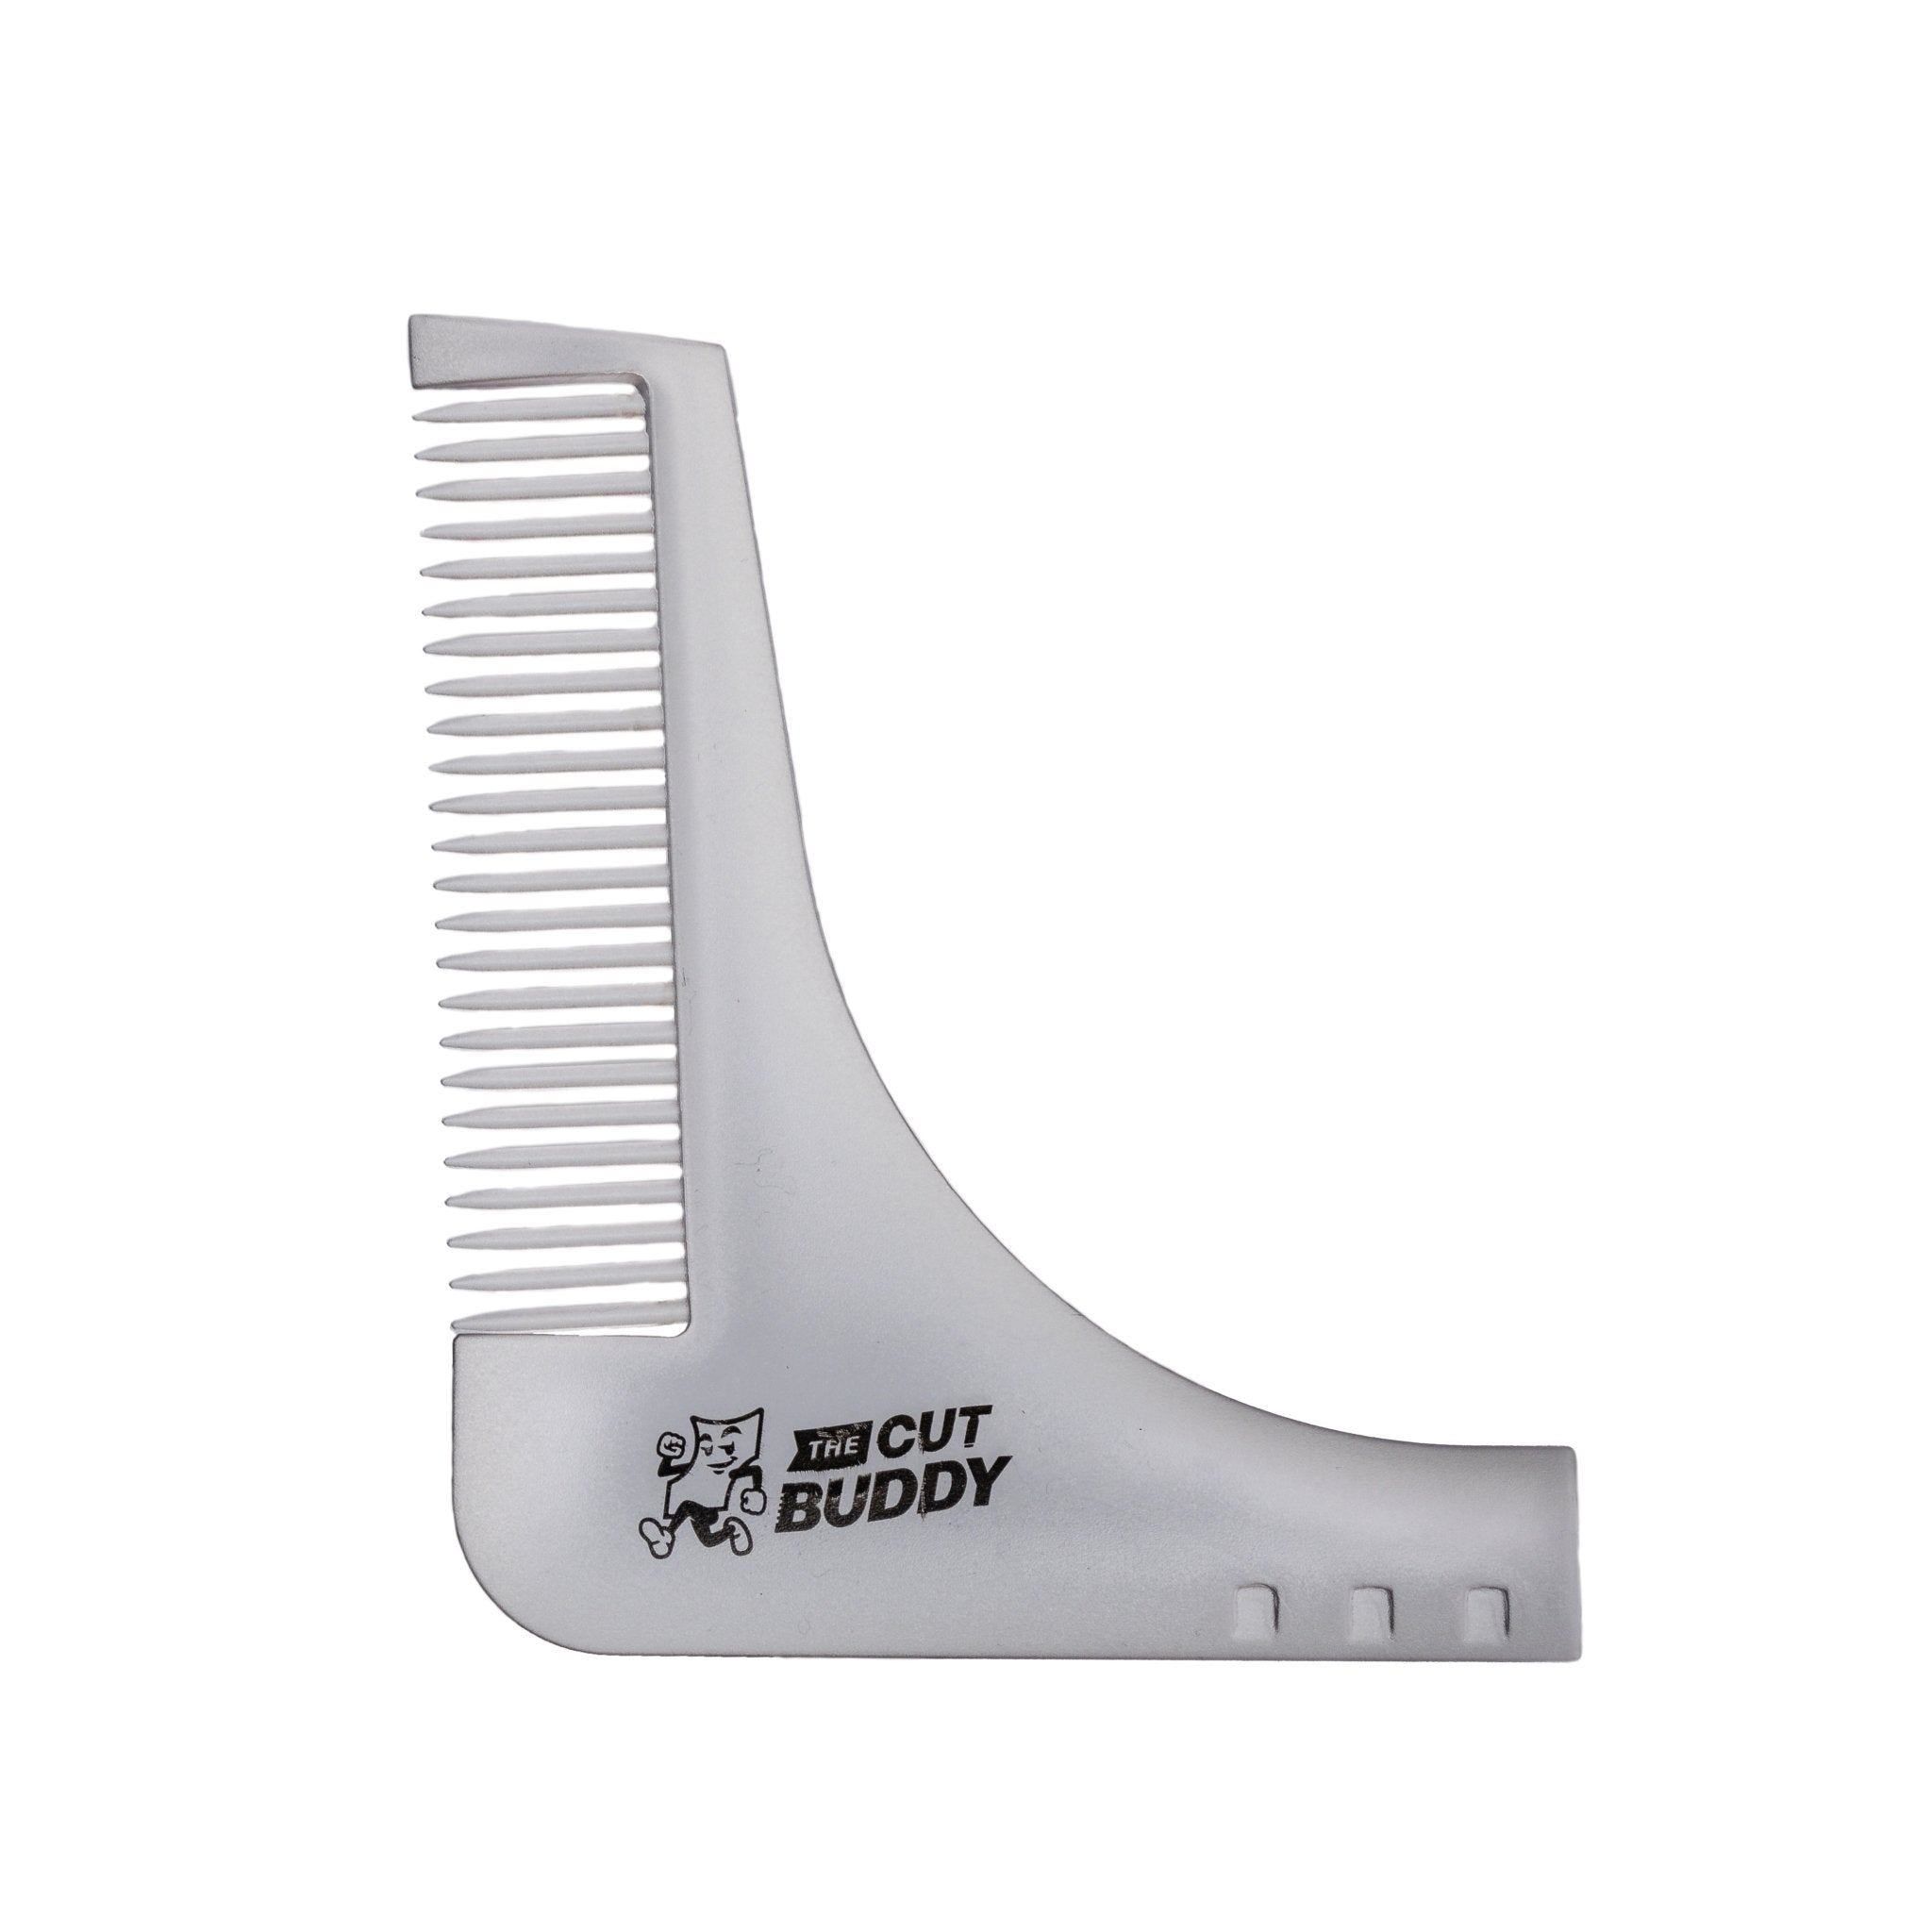 Tips For Enhancing A Line-Up With Cut Buddy Products - The Cut Buddy